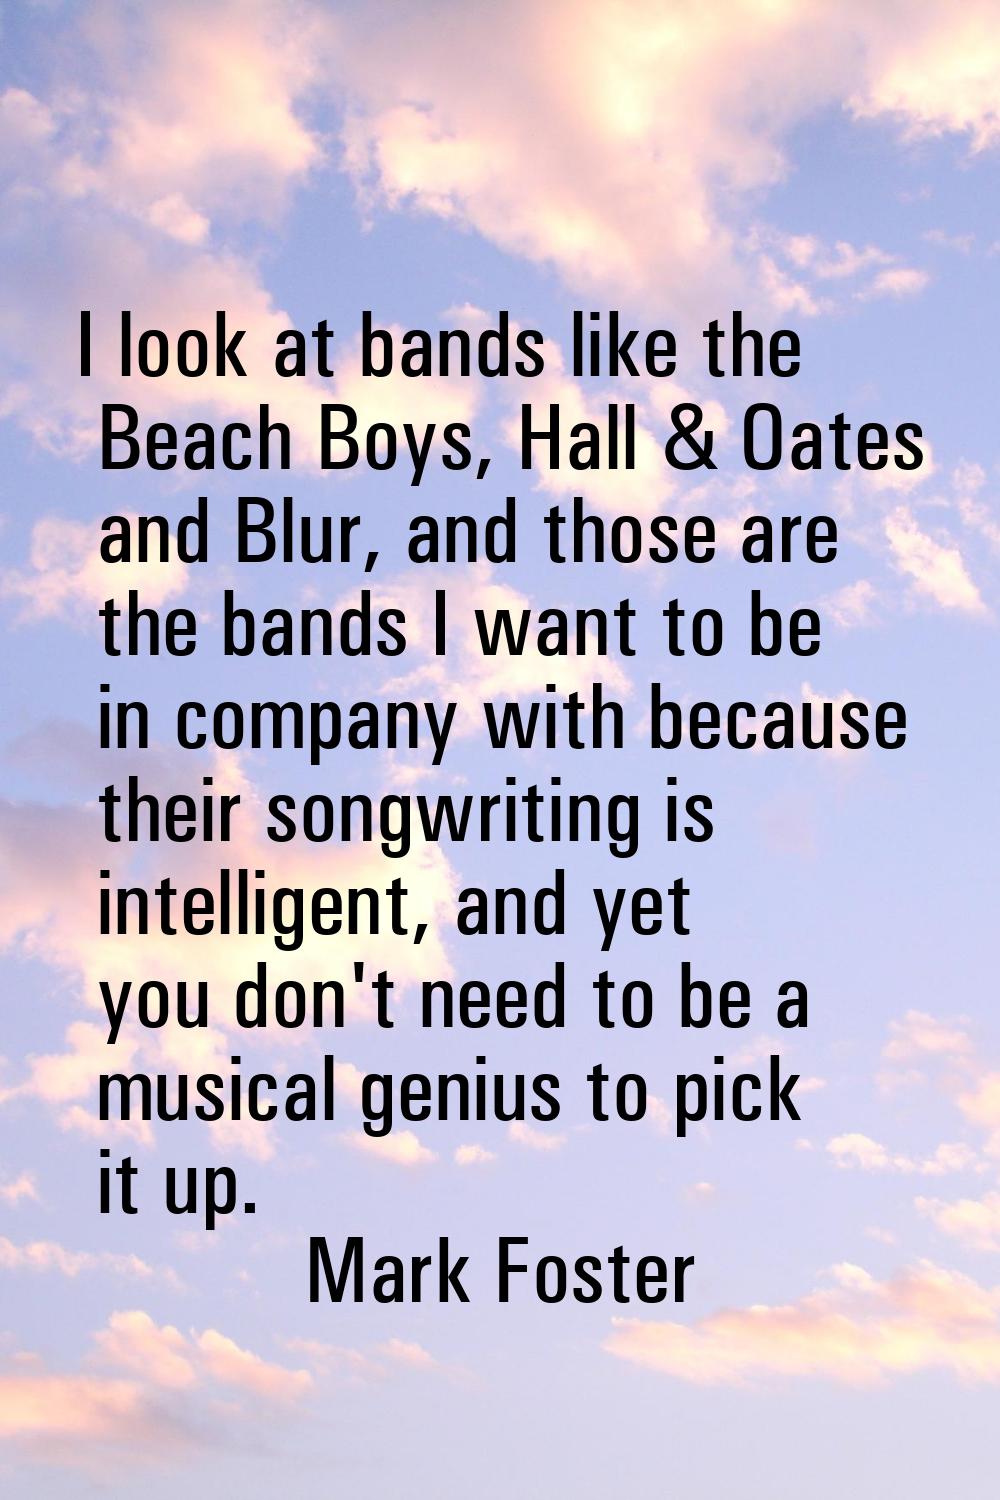 I look at bands like the Beach Boys, Hall & Oates and Blur, and those are the bands I want to be in